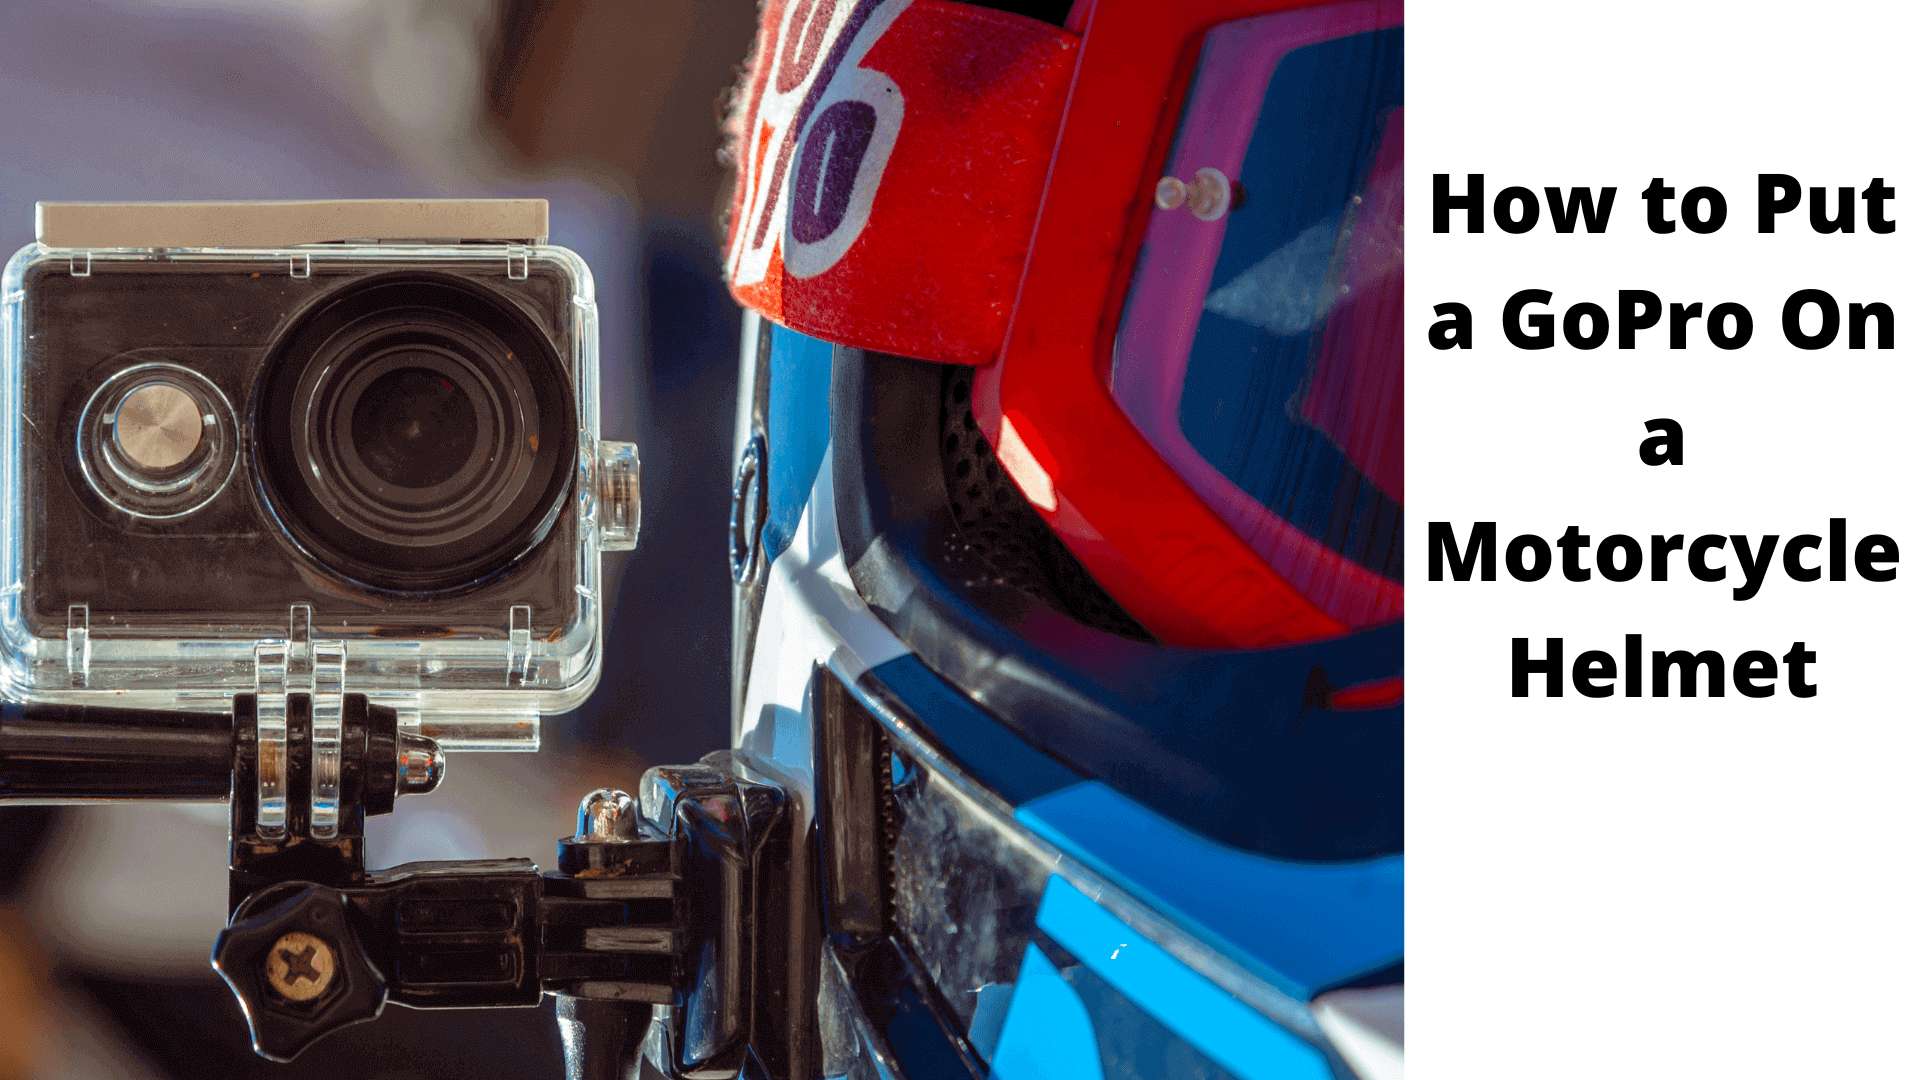 How to Put a GoPro On a Motorcycle Helmet For Awesome Video Recordings!